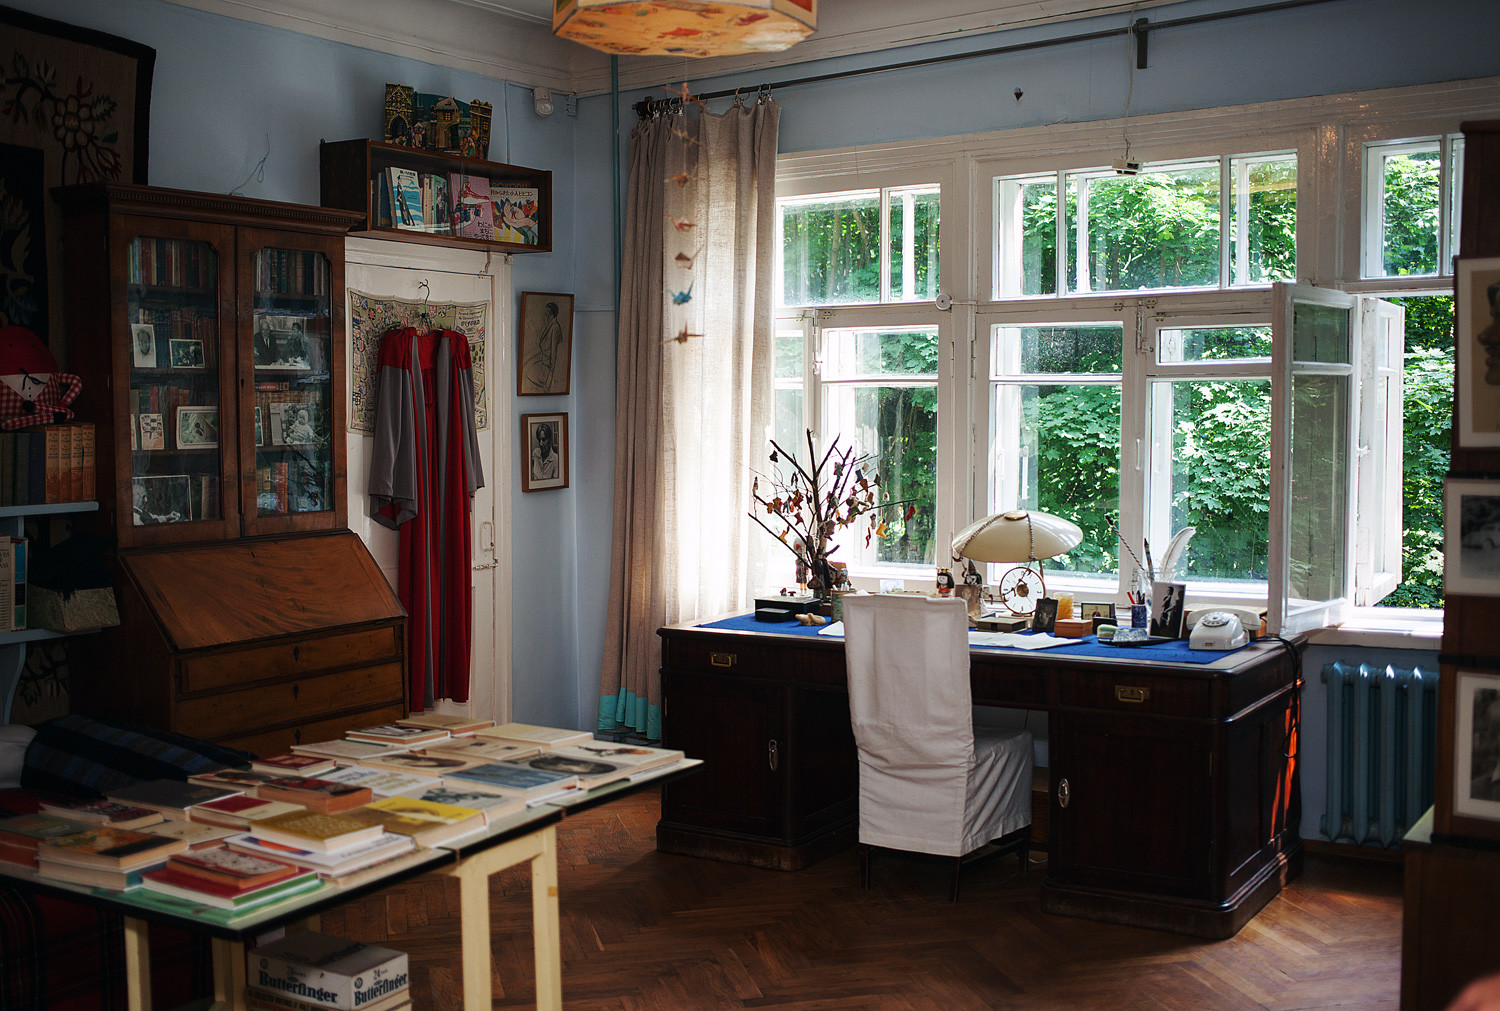 A room where writer Korney Chukovsky lived in his memorial house in Peredelkino.